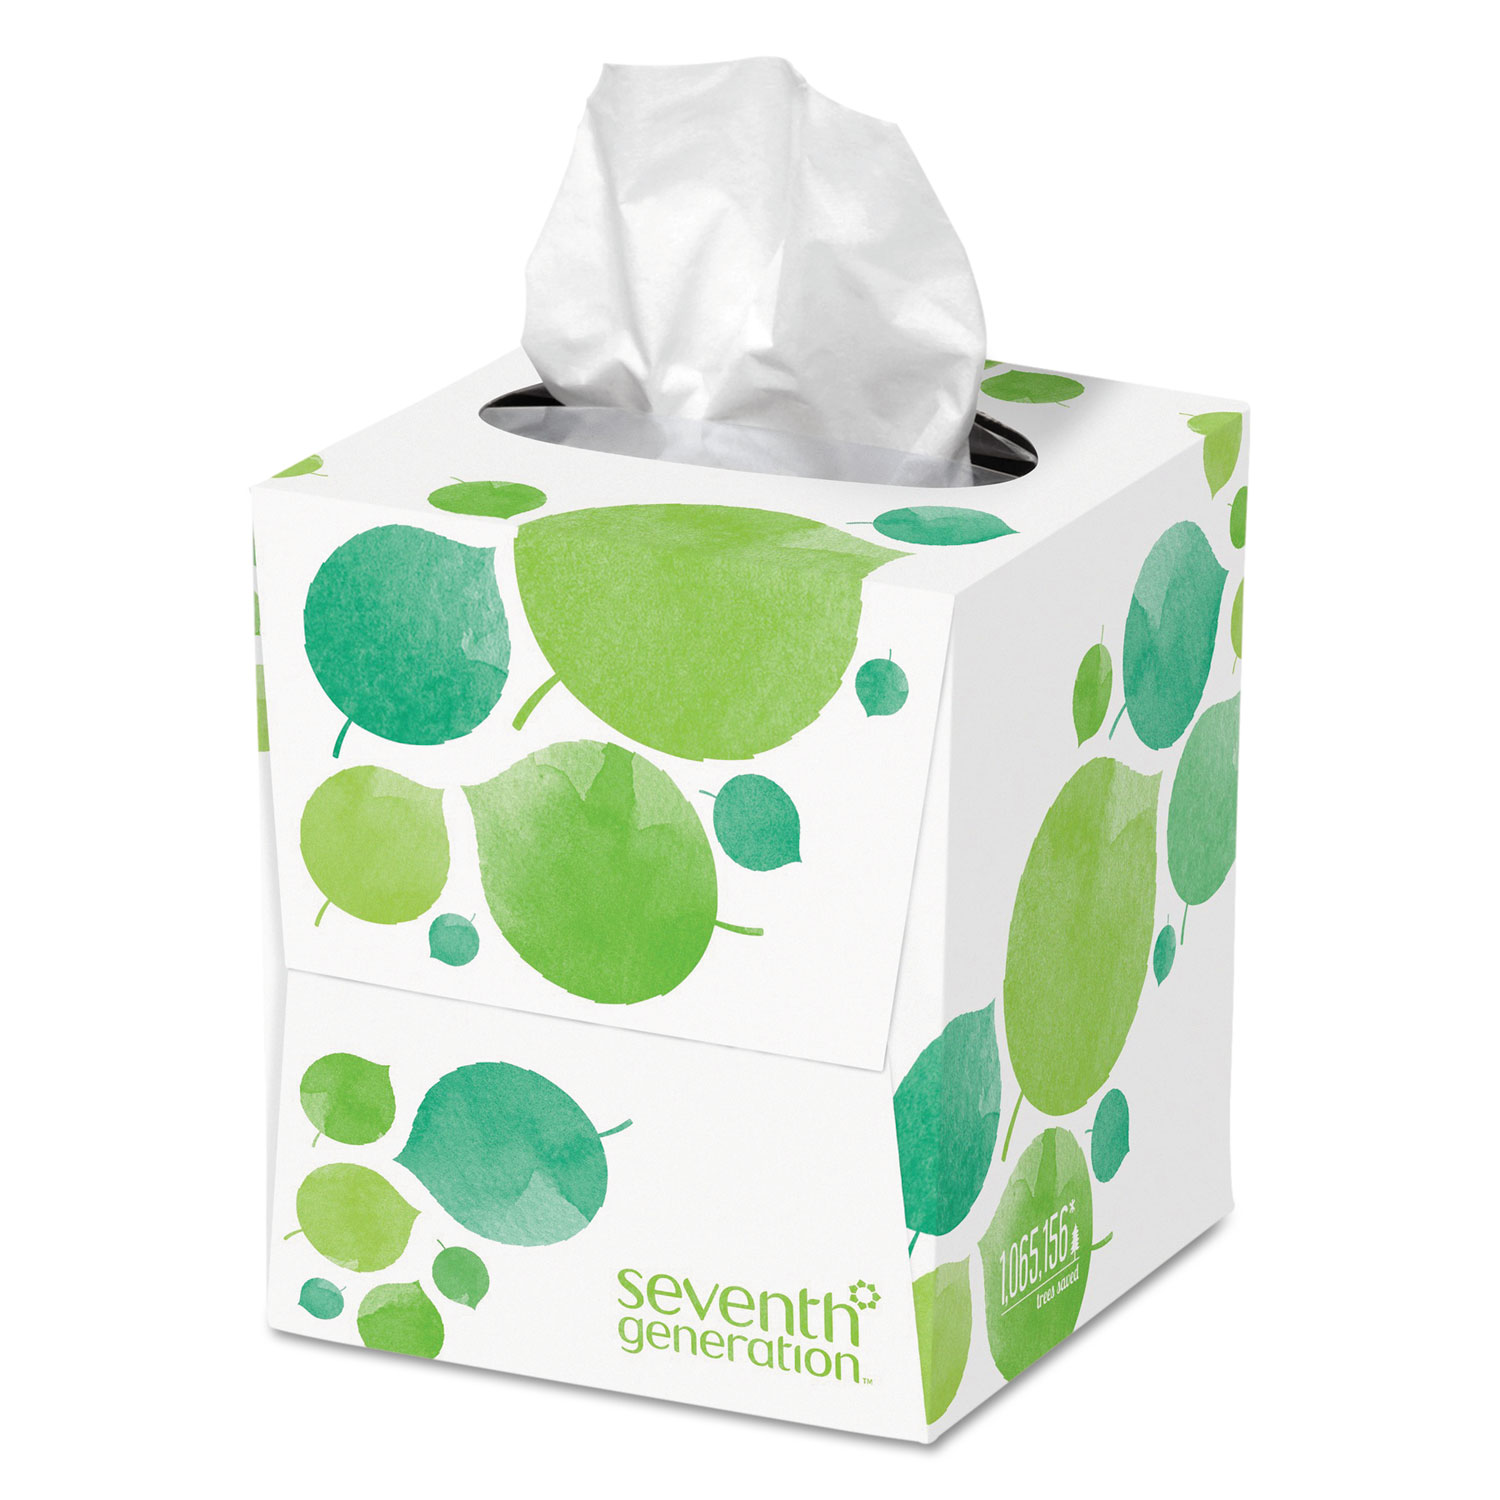  Seventh Generation 13719 100% Recycled Facial Tissue, 2-Ply, White, 85 Sheets/Box (SEV13719EA) 